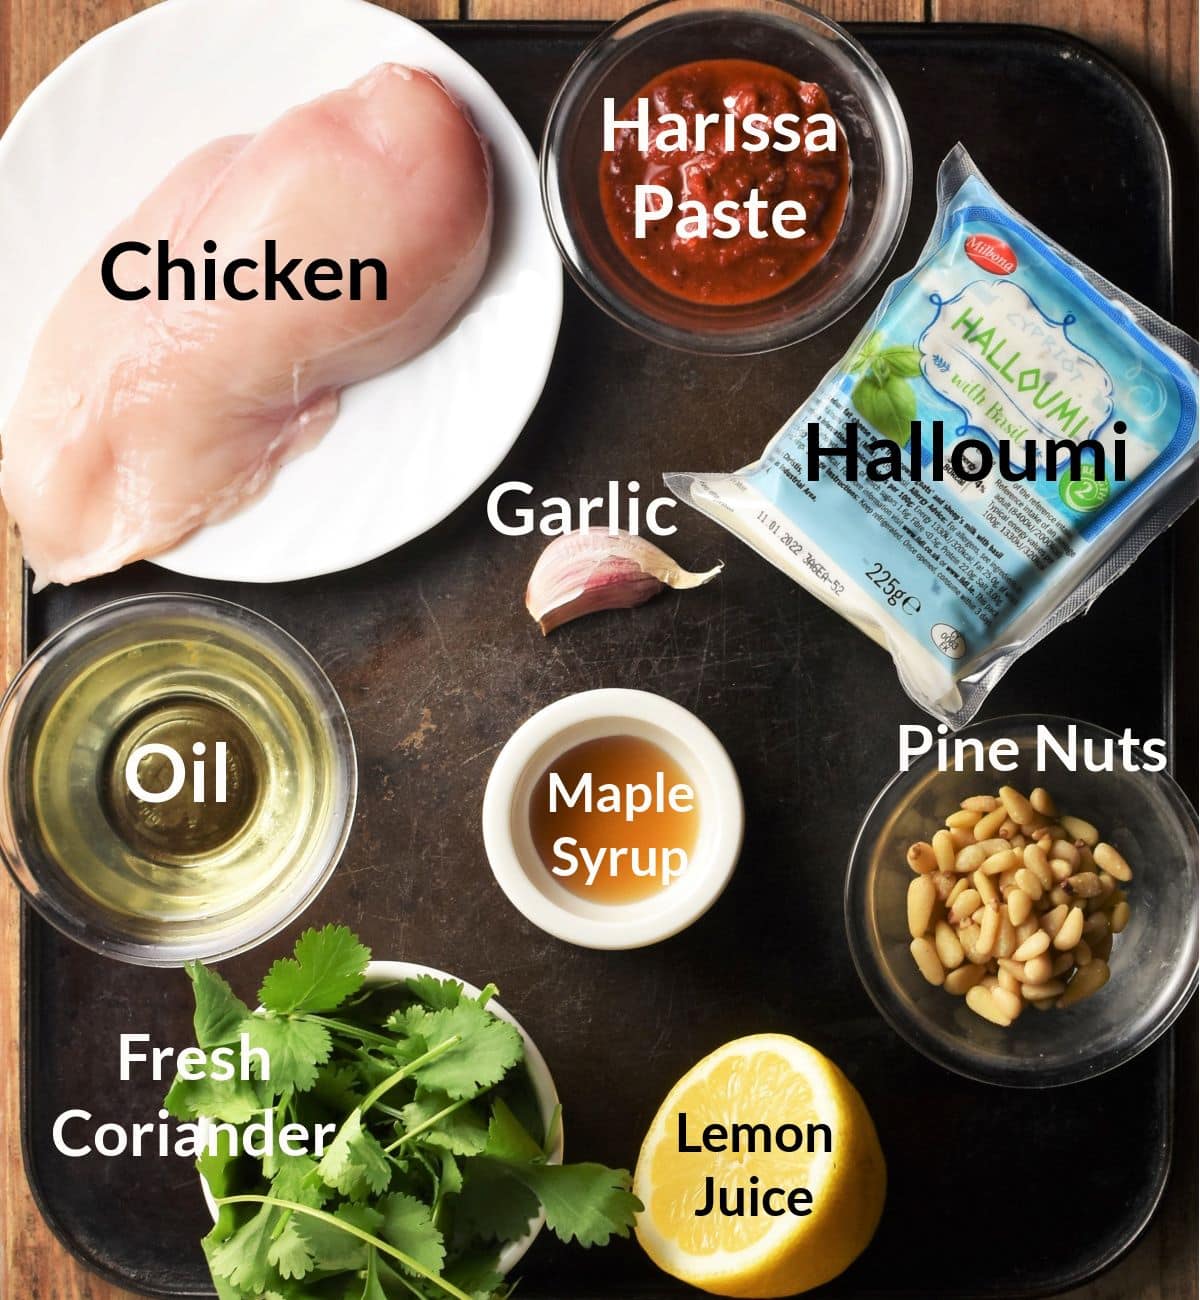 Ingredients for making hasselback chicken in individual dishes.